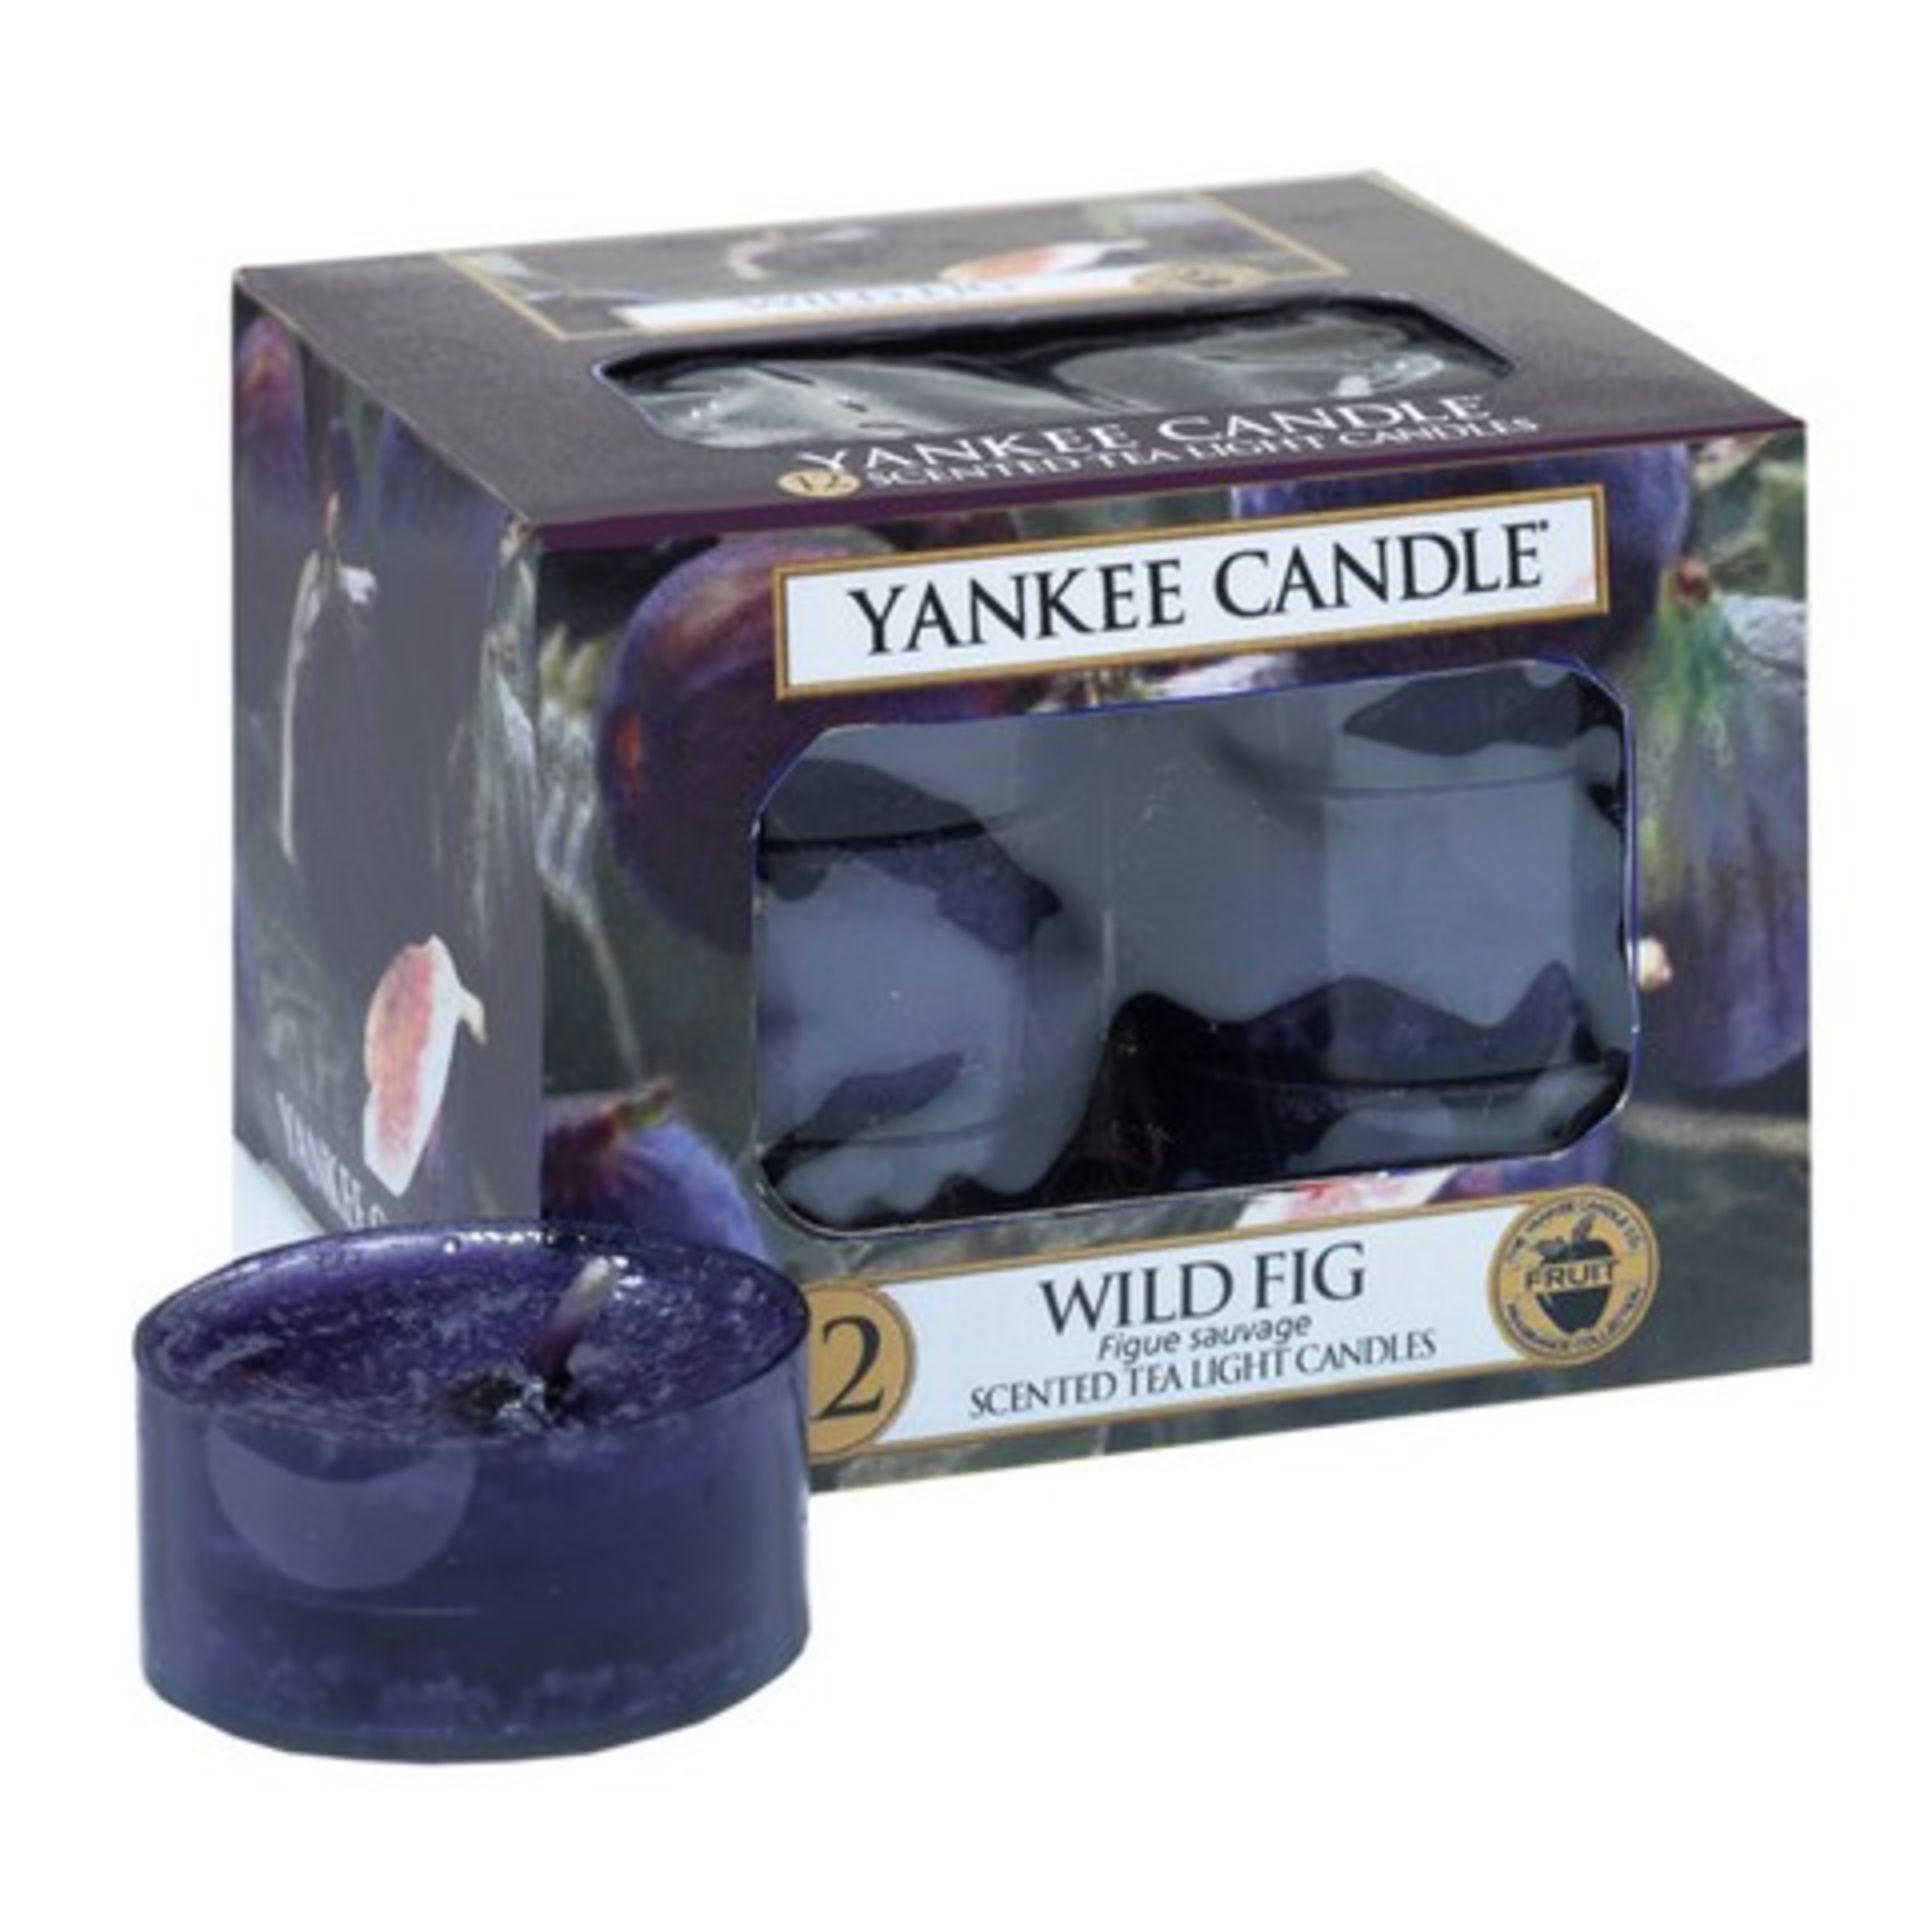 V Brand New 12 Yankee Candle Scented Tea Light Candles Wild Fig